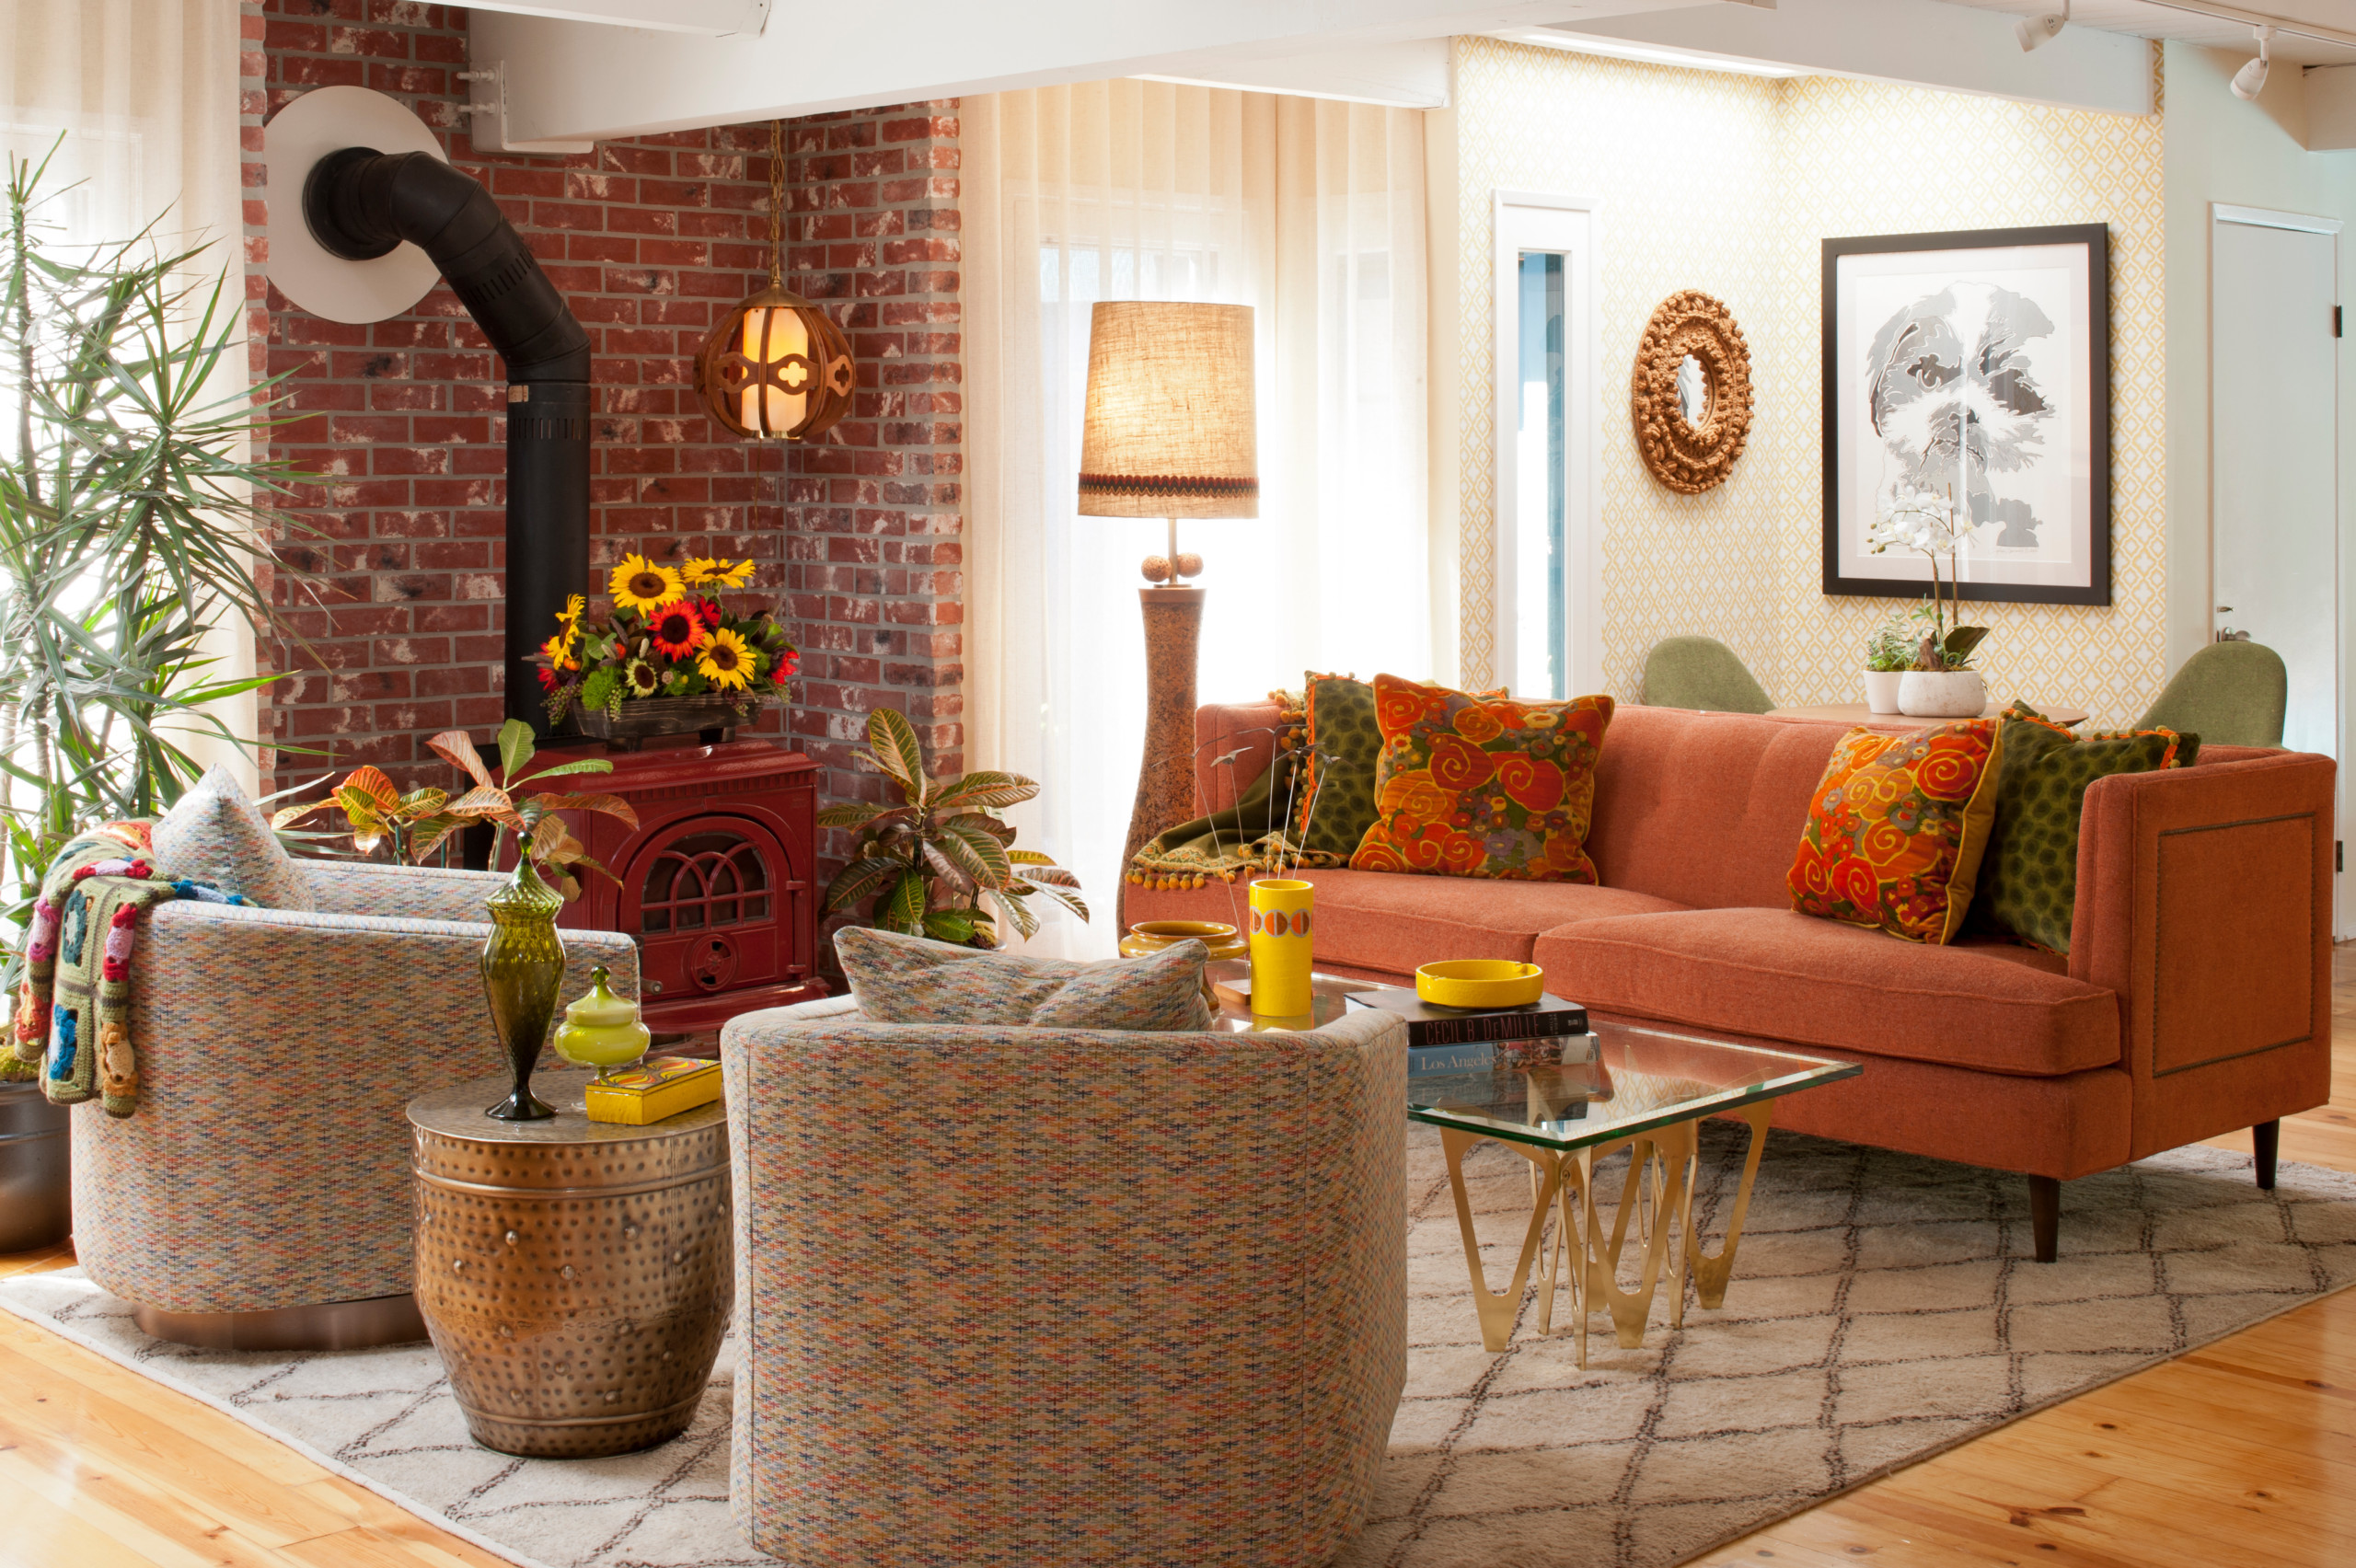 75 Brown Living Room Ideas You'll Love - January, 2023 | Houzz